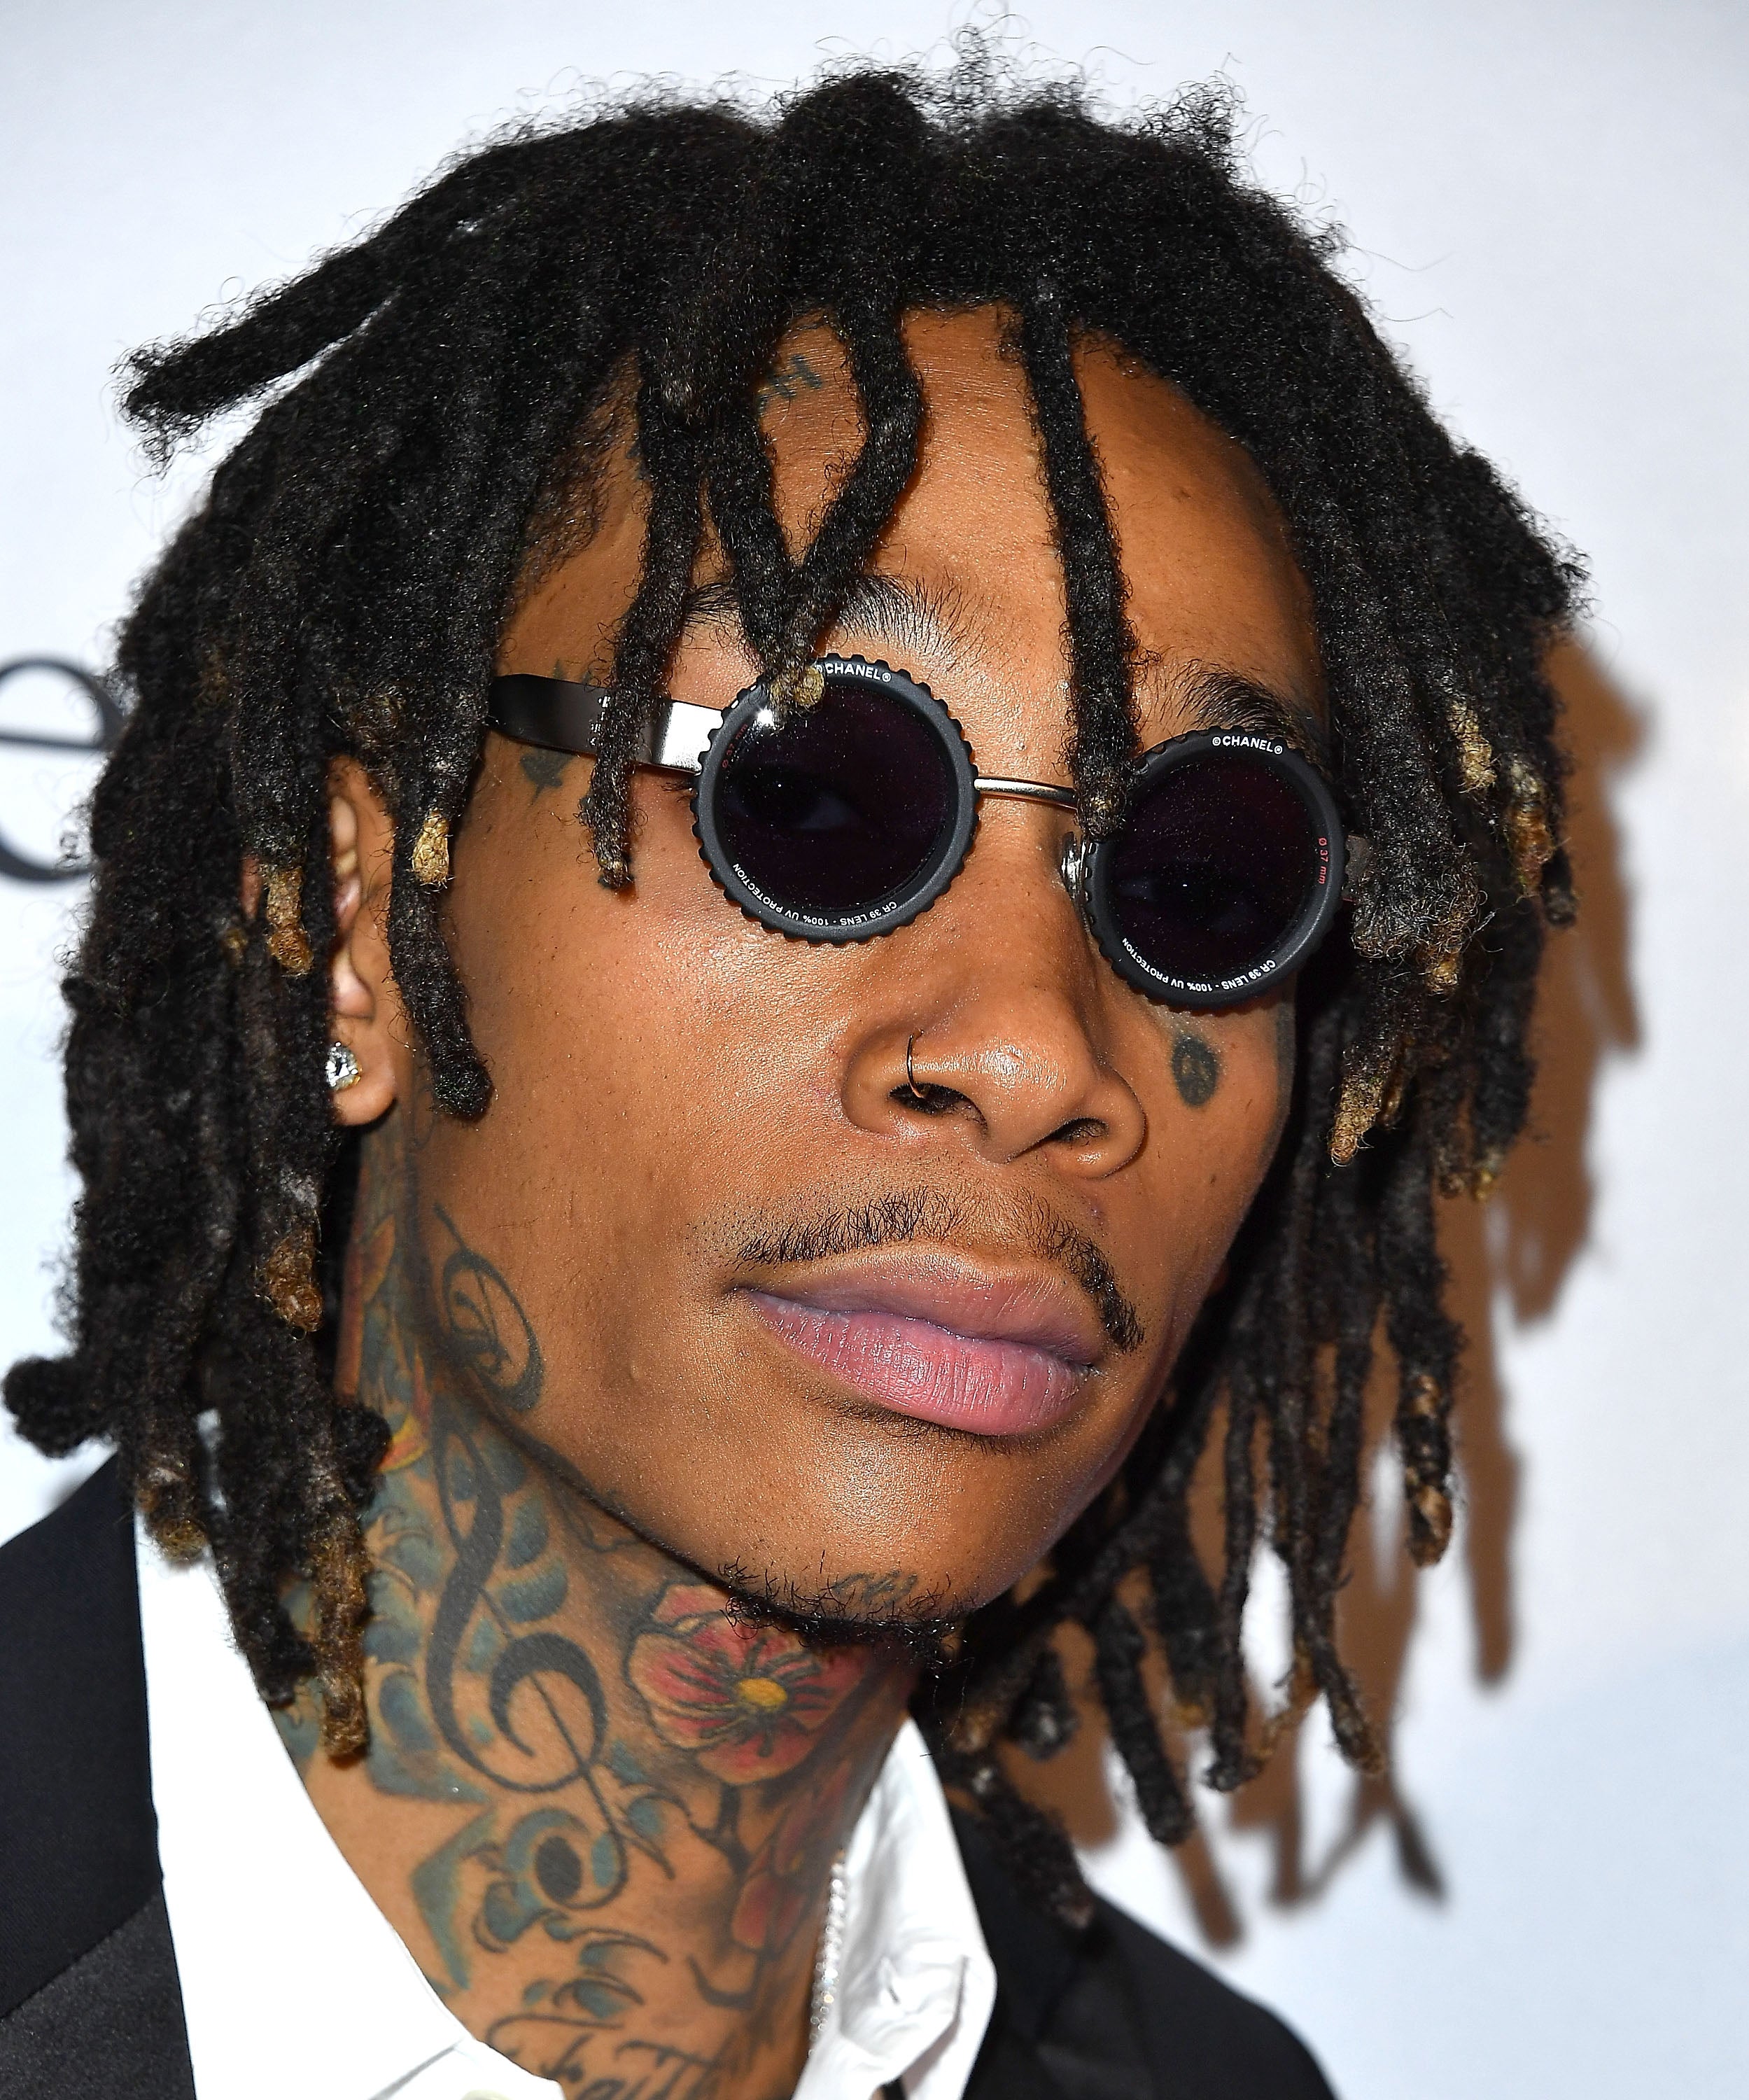 Wiz Khalifa Addresses the Death of His Sister: 'My Family Will Get Through This'
